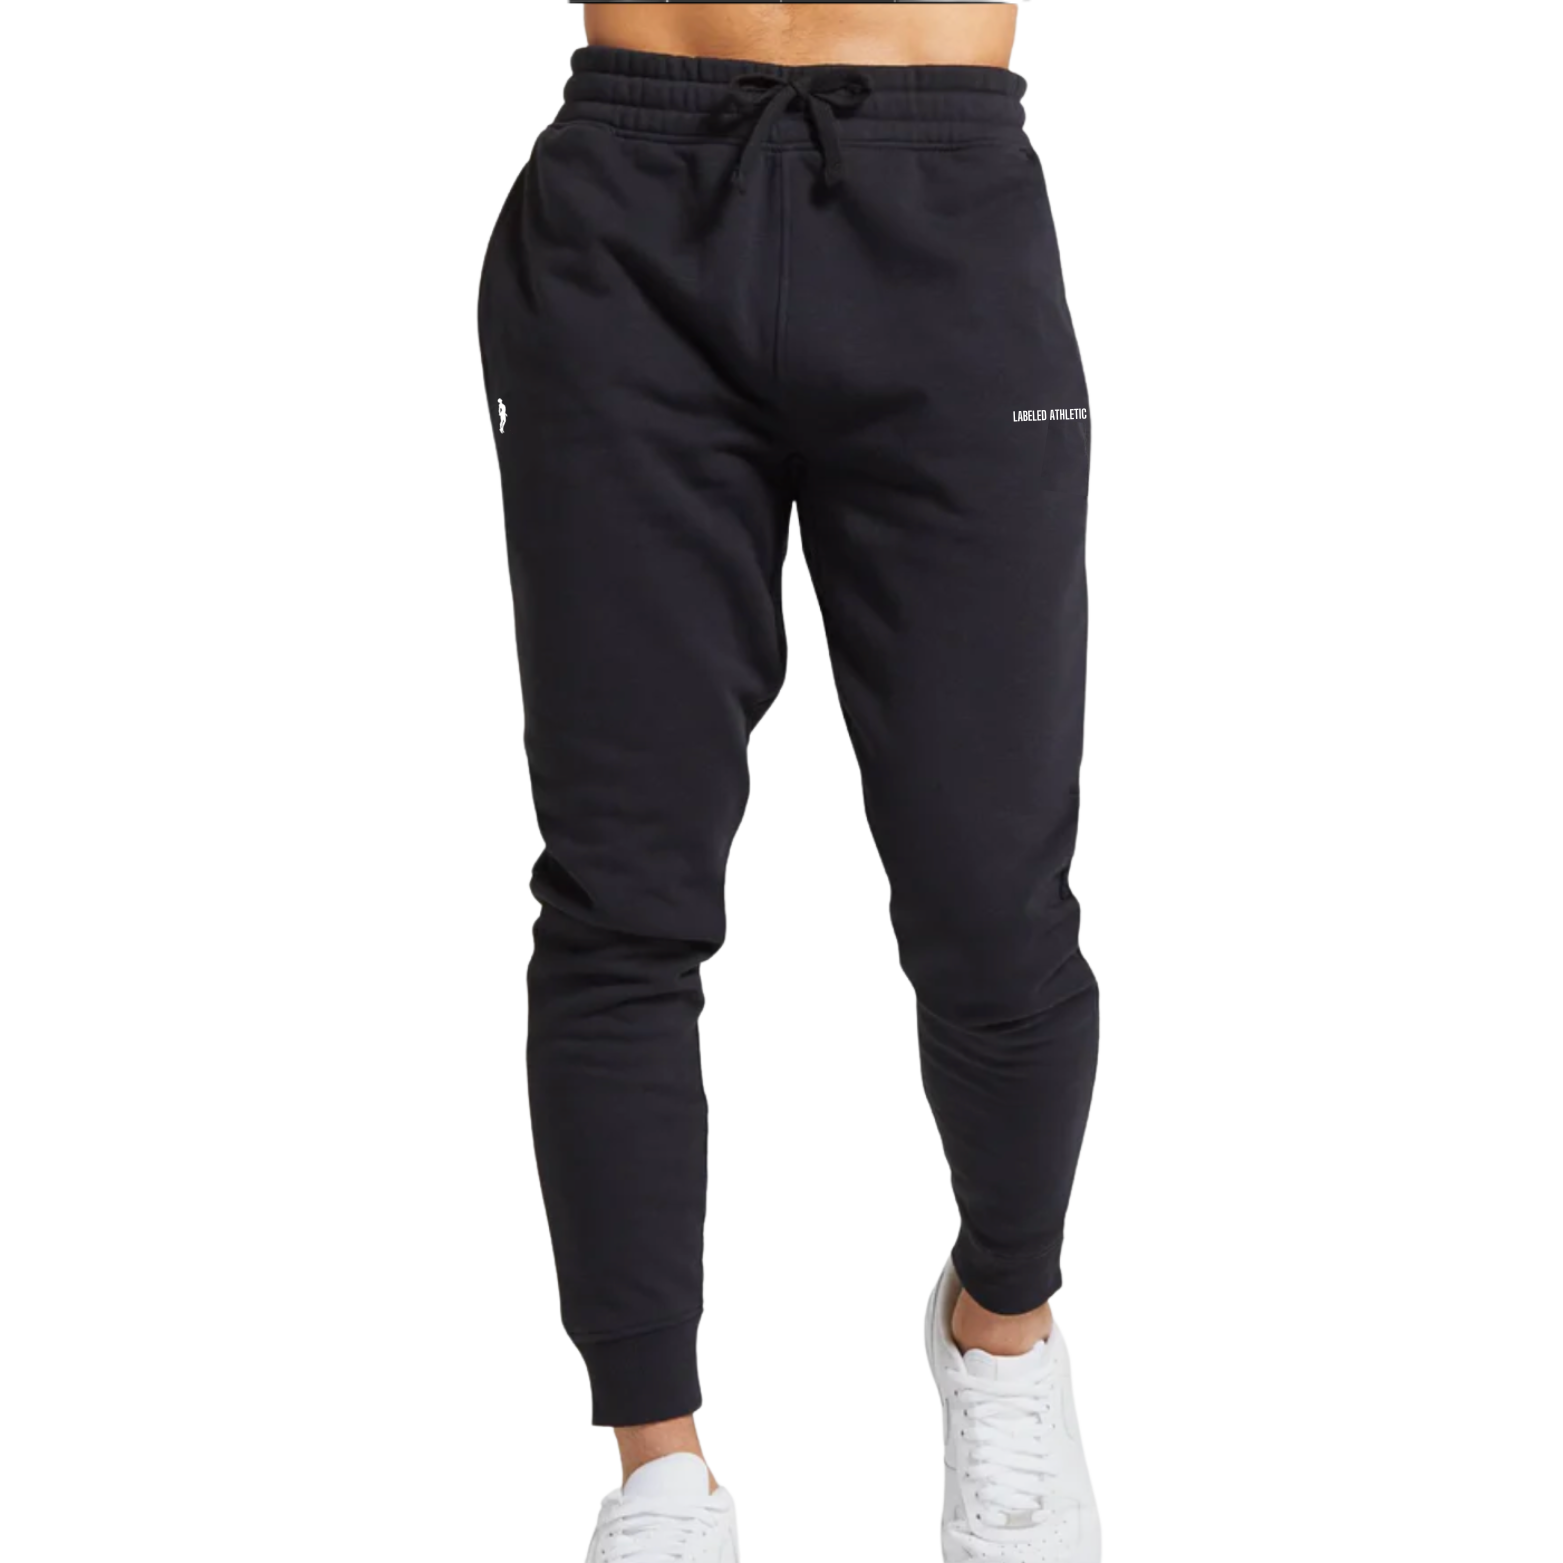 LABELED ATHLETIC HOODIE SZN | BLACK/WHITE JOGGER/PANT